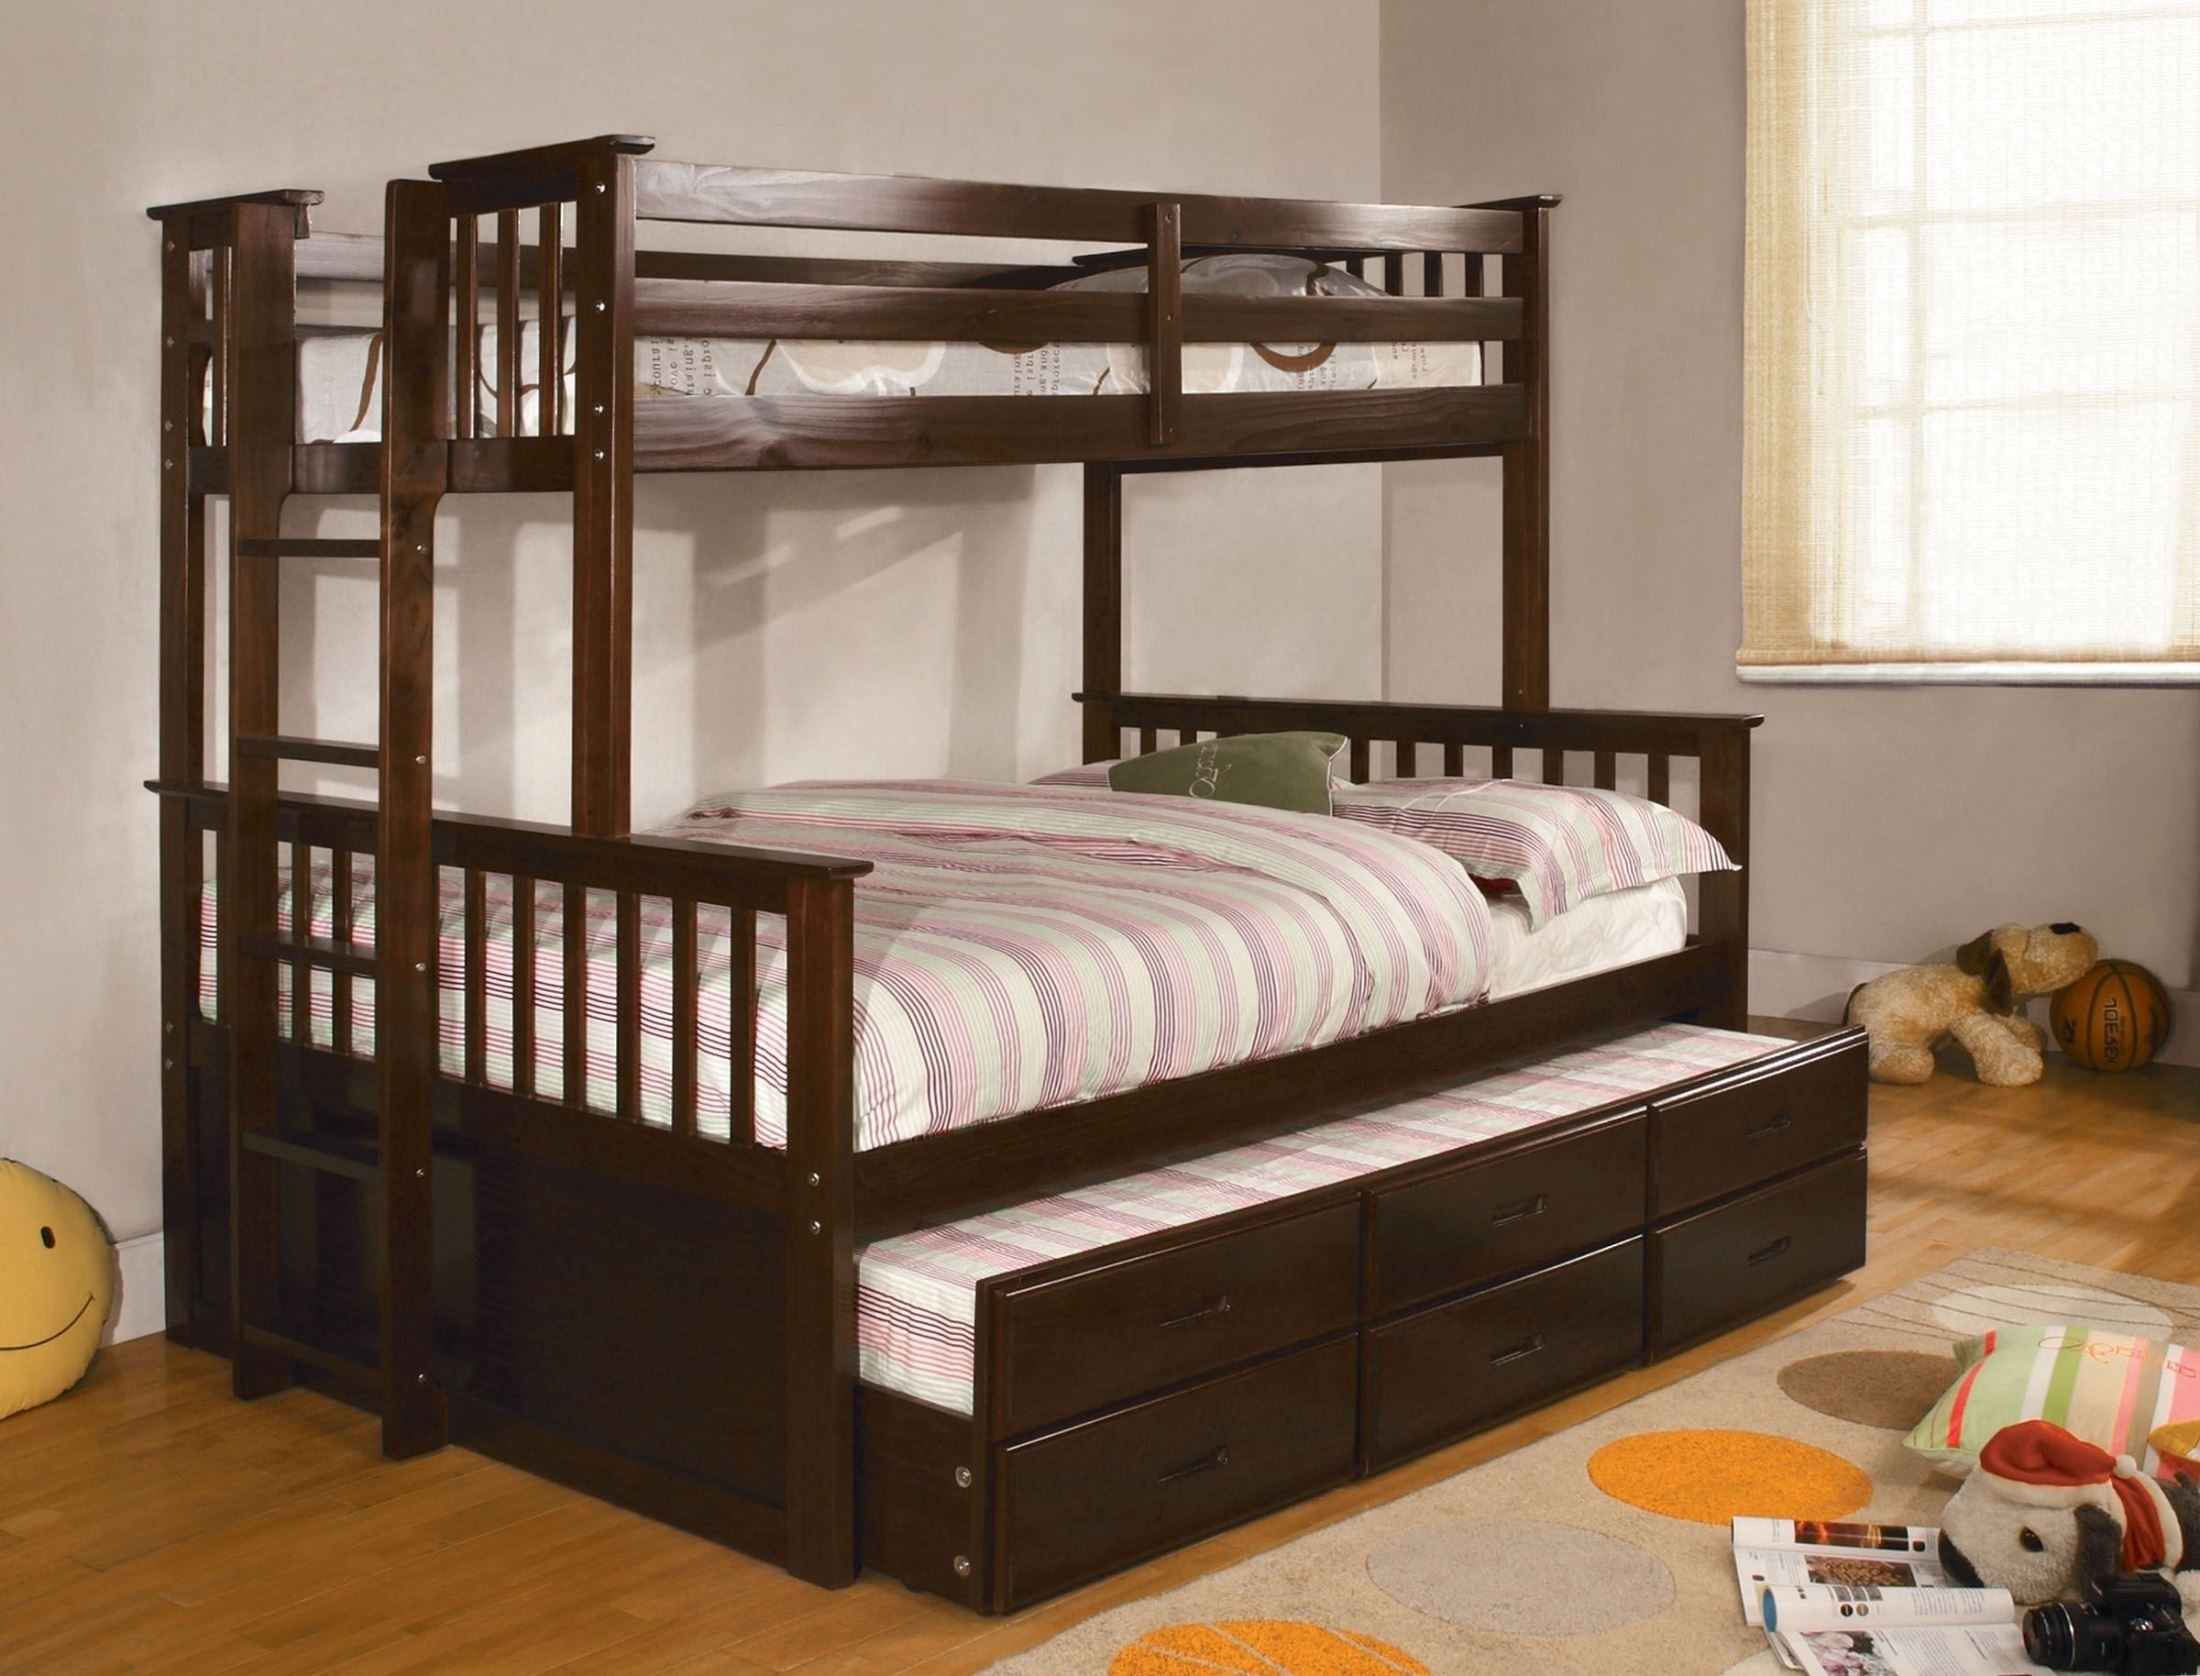 Bunk Beds With Full Bed On Bottom - Ideas on Foter